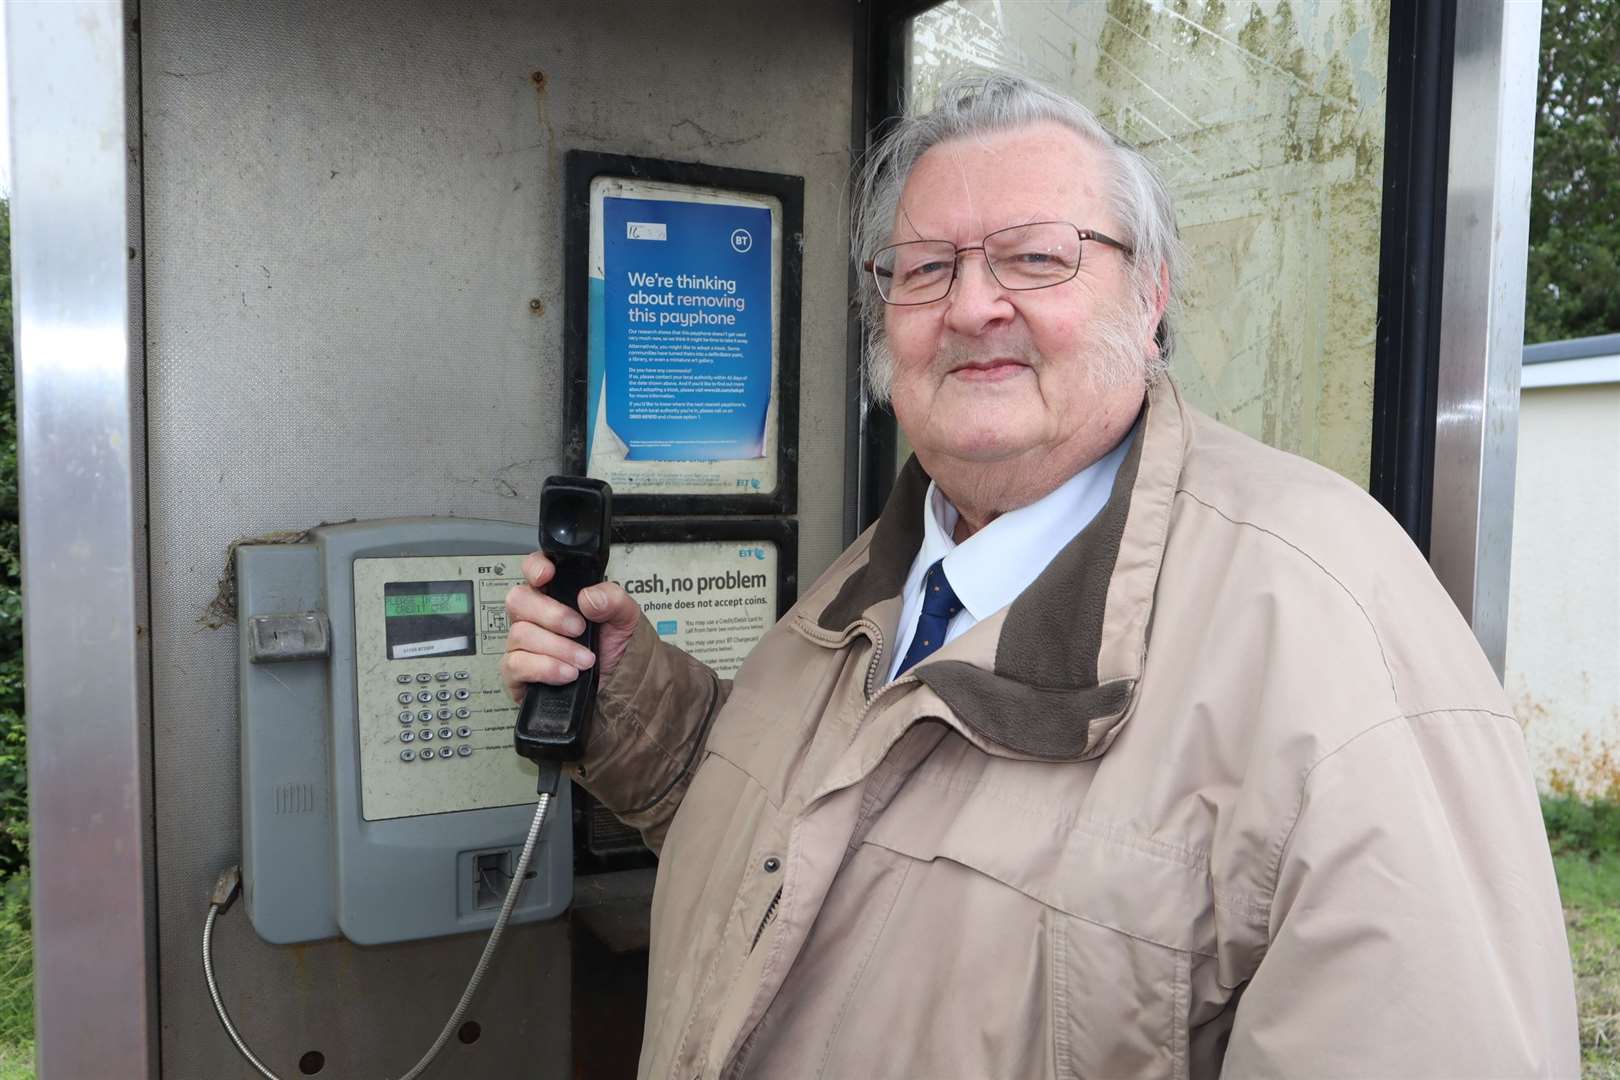 Ken Ingleton, chairman of Minster parish council, wants the phone box near the White House restaurant in Minster to be retained for emergency calls